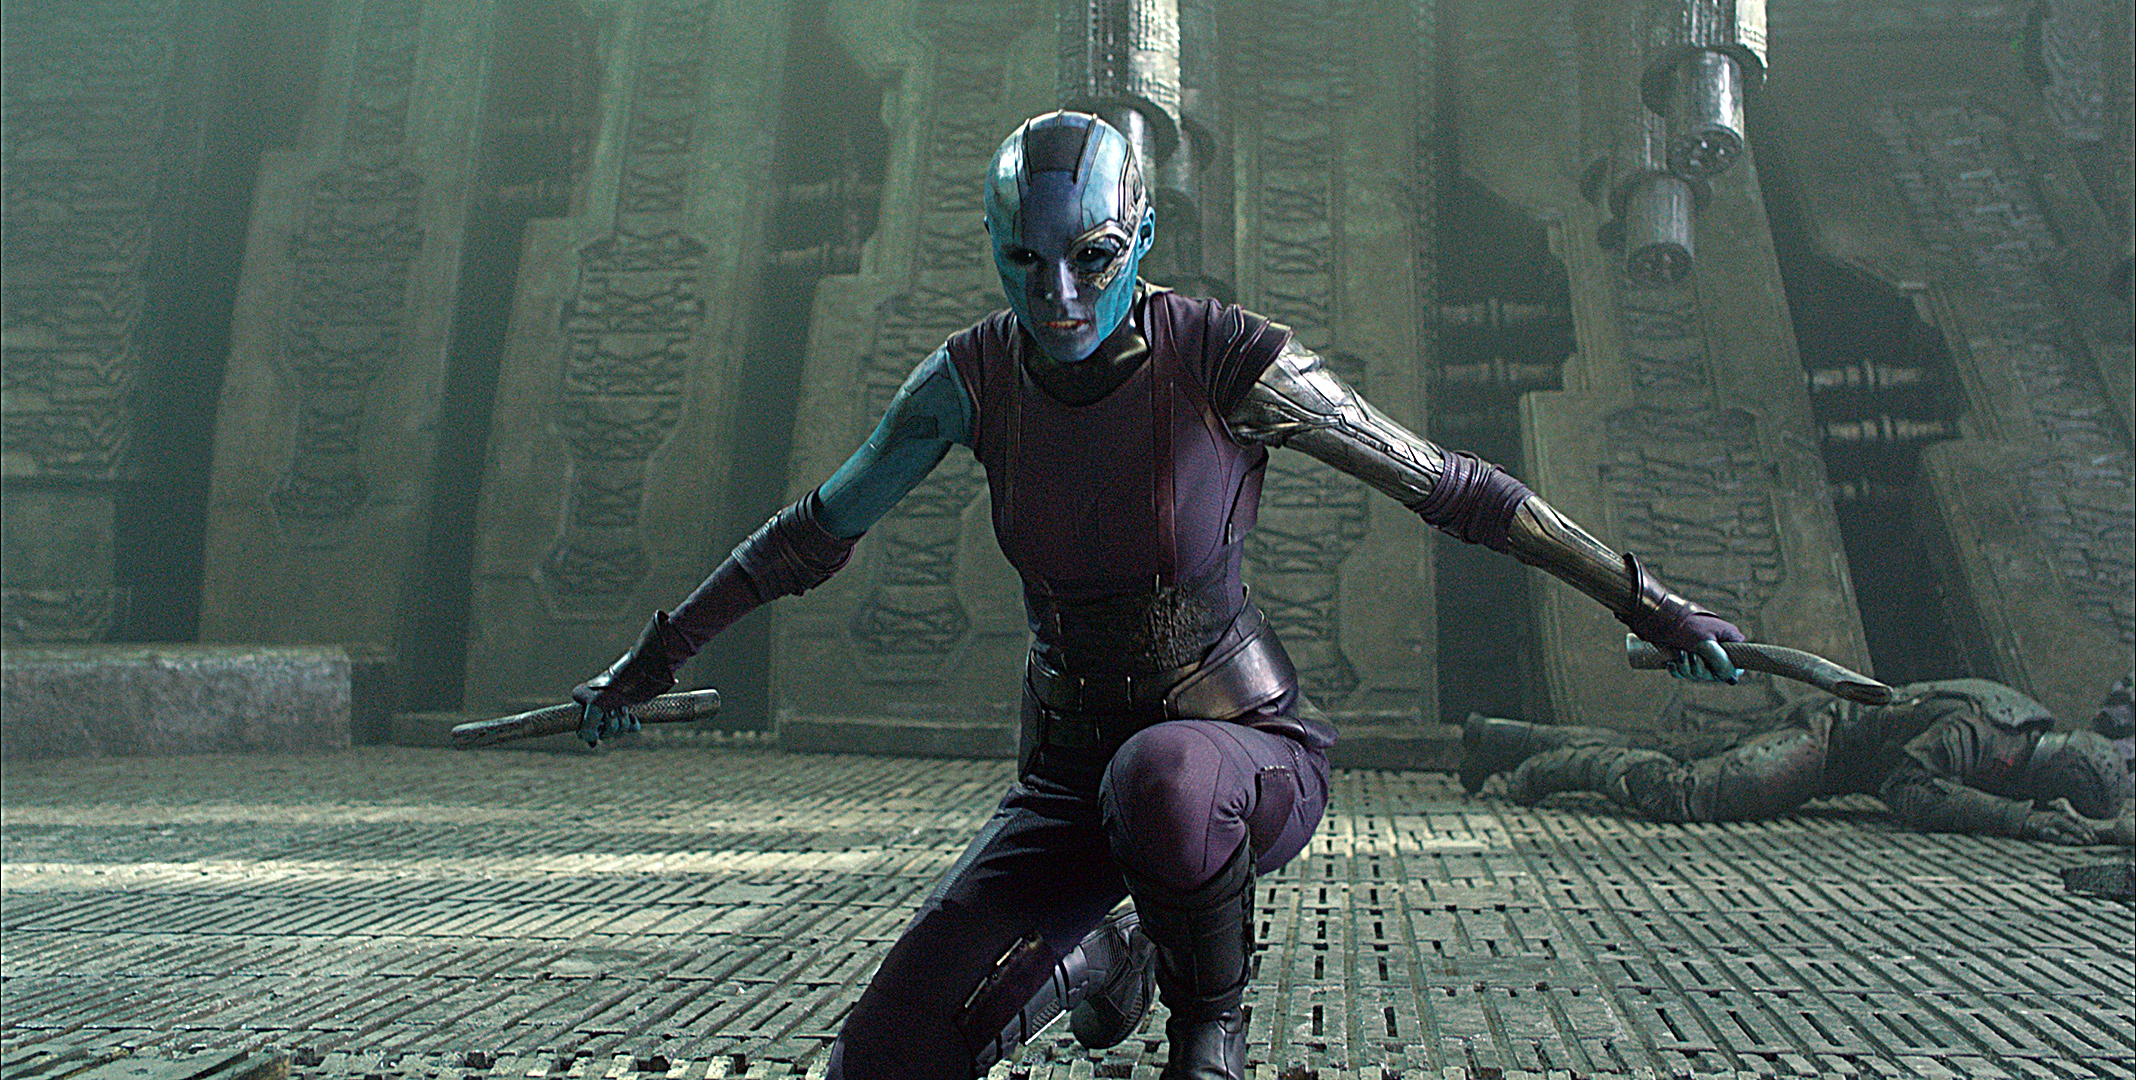 Nebula in Guardians of the Galaxy